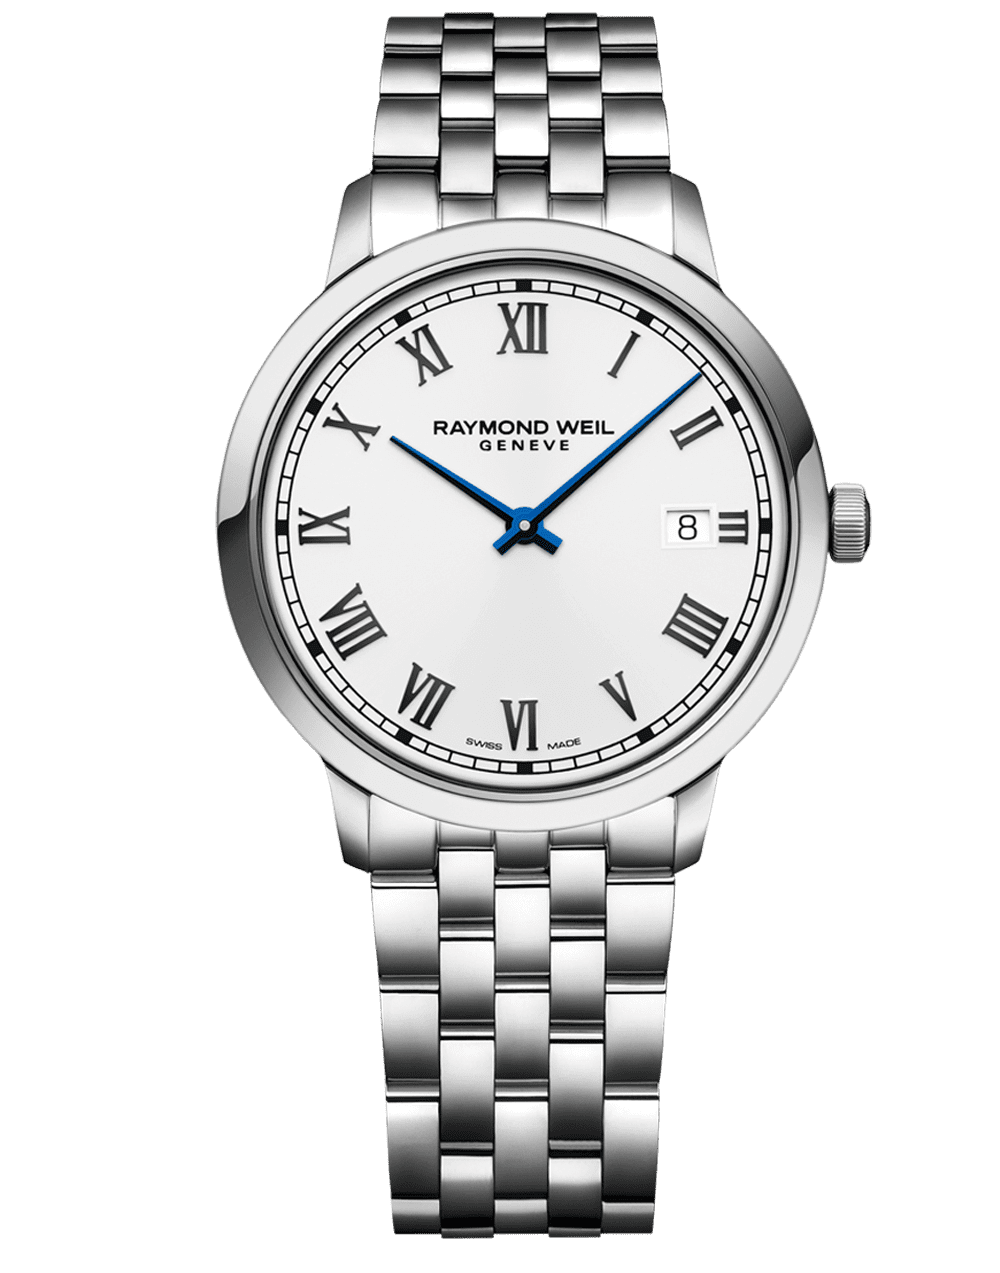 Toccata Men’s Classic White Dial Stainless Steel Quartz Watch, 39 mm